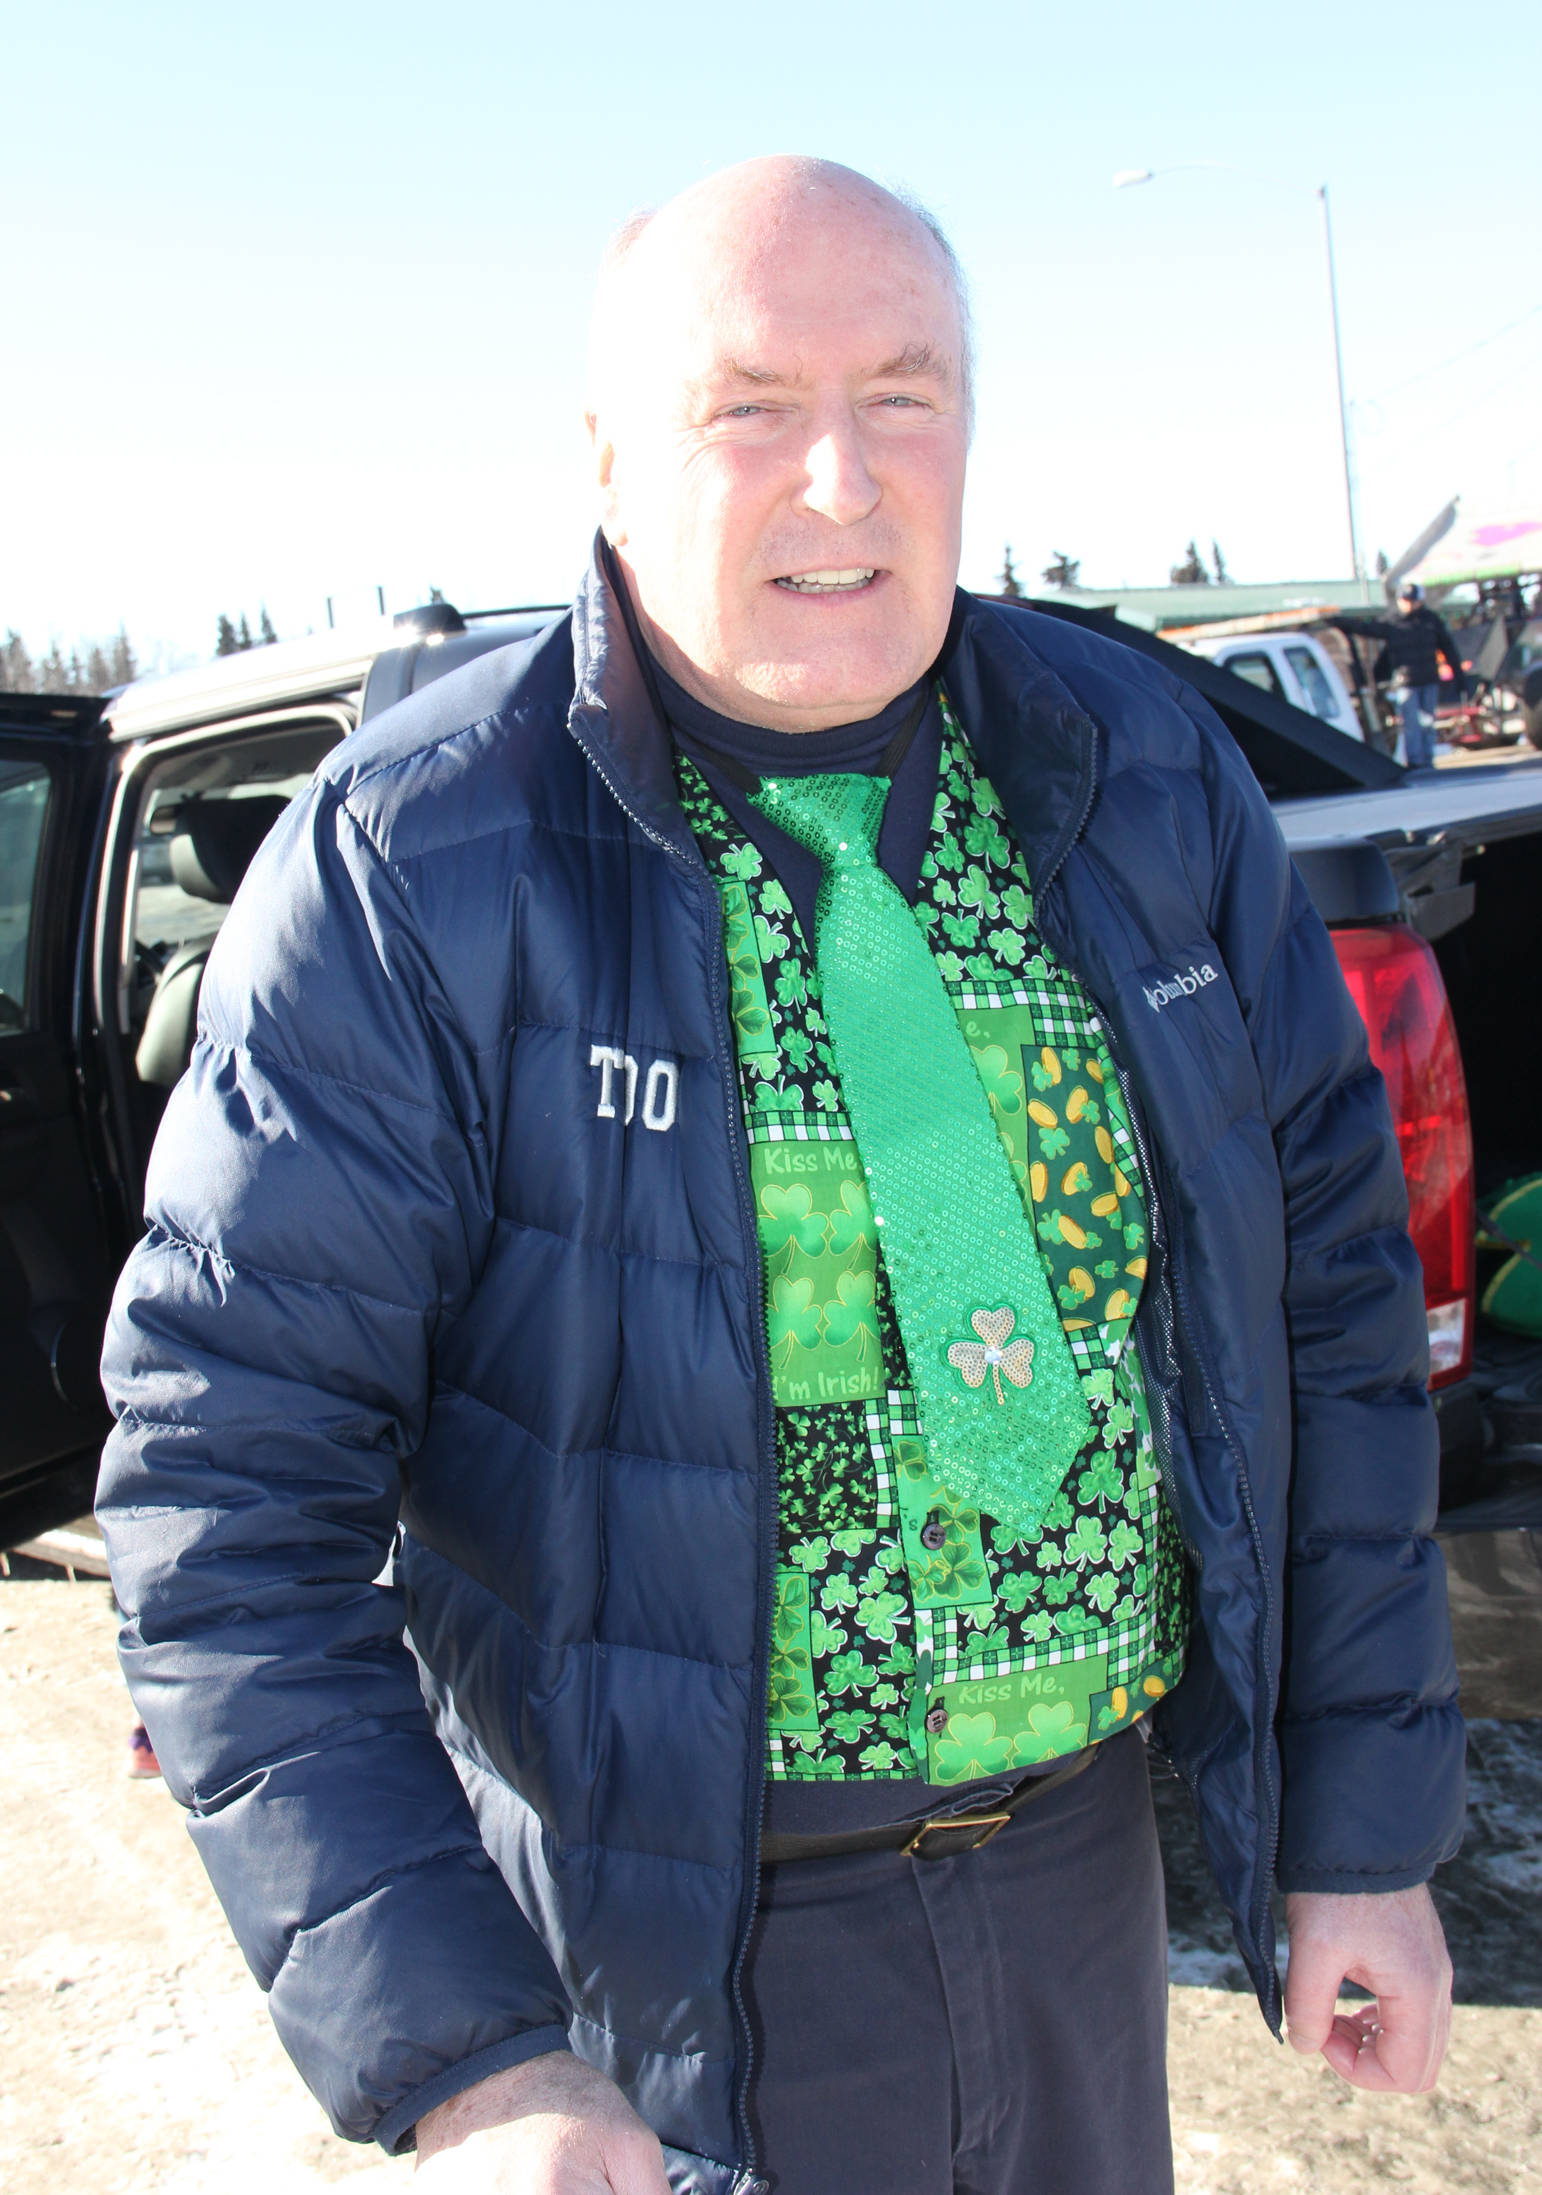 Parade founder and resident leprechaun Michael Sweeney loves St. Patrick’s Day.